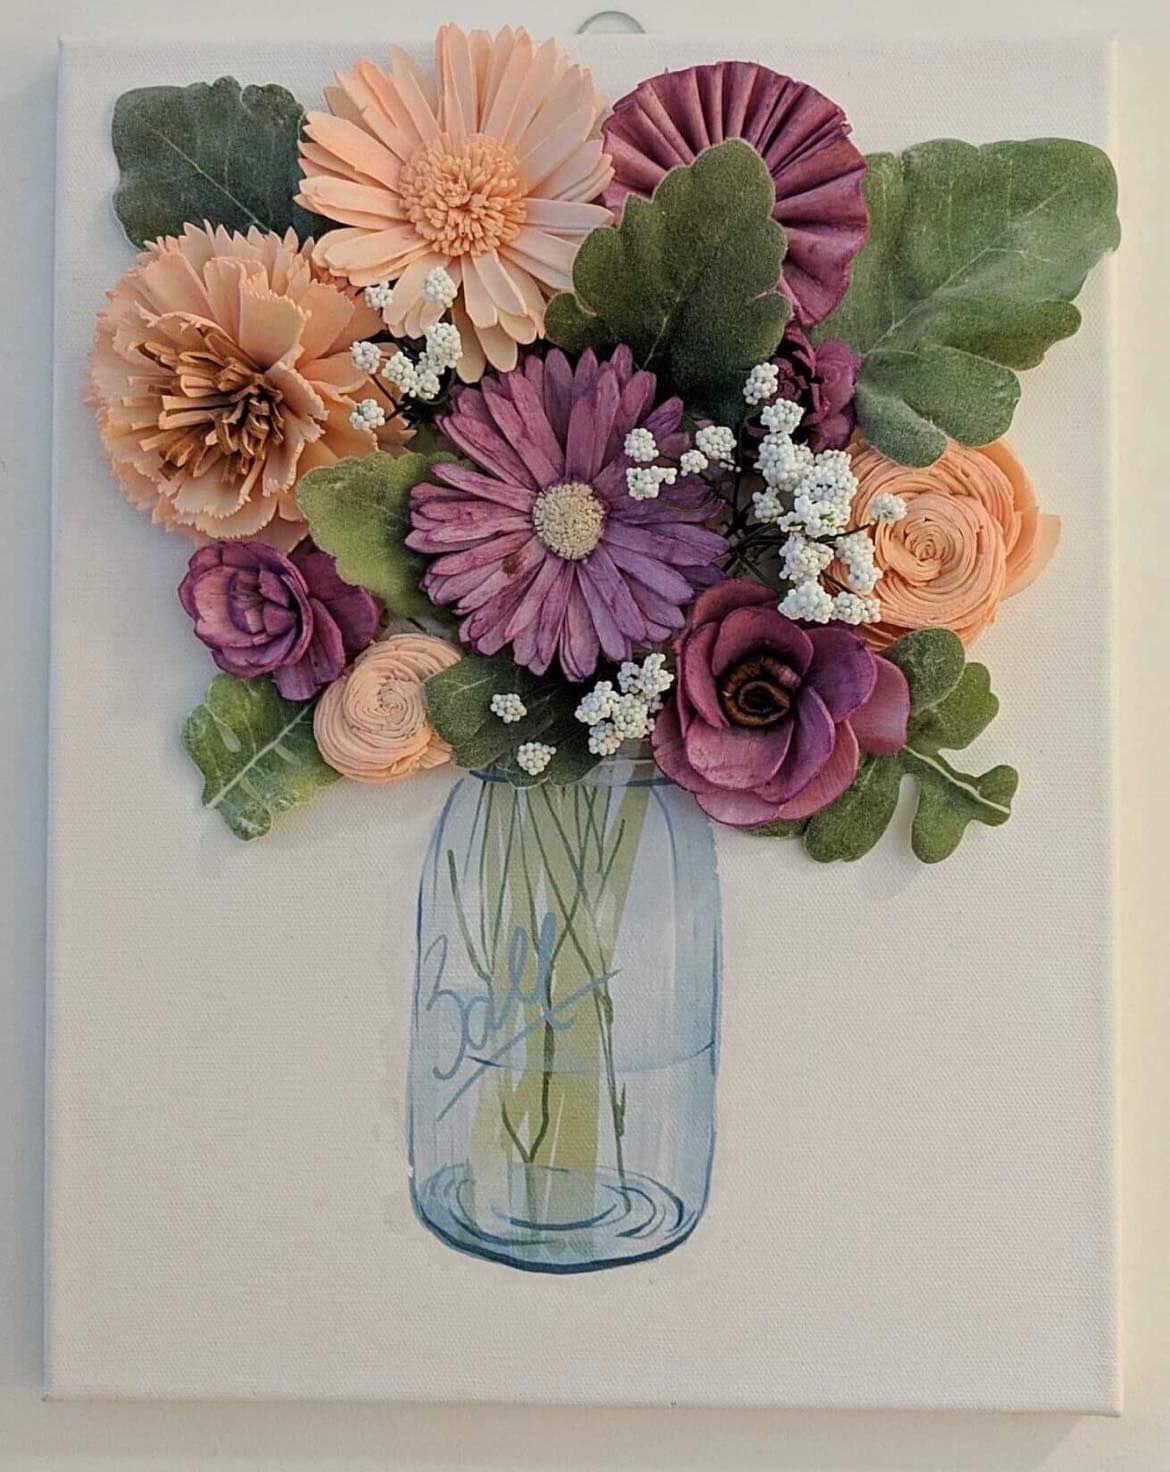 SOLD OUT - Wood Flower Mason Jar - Canvas